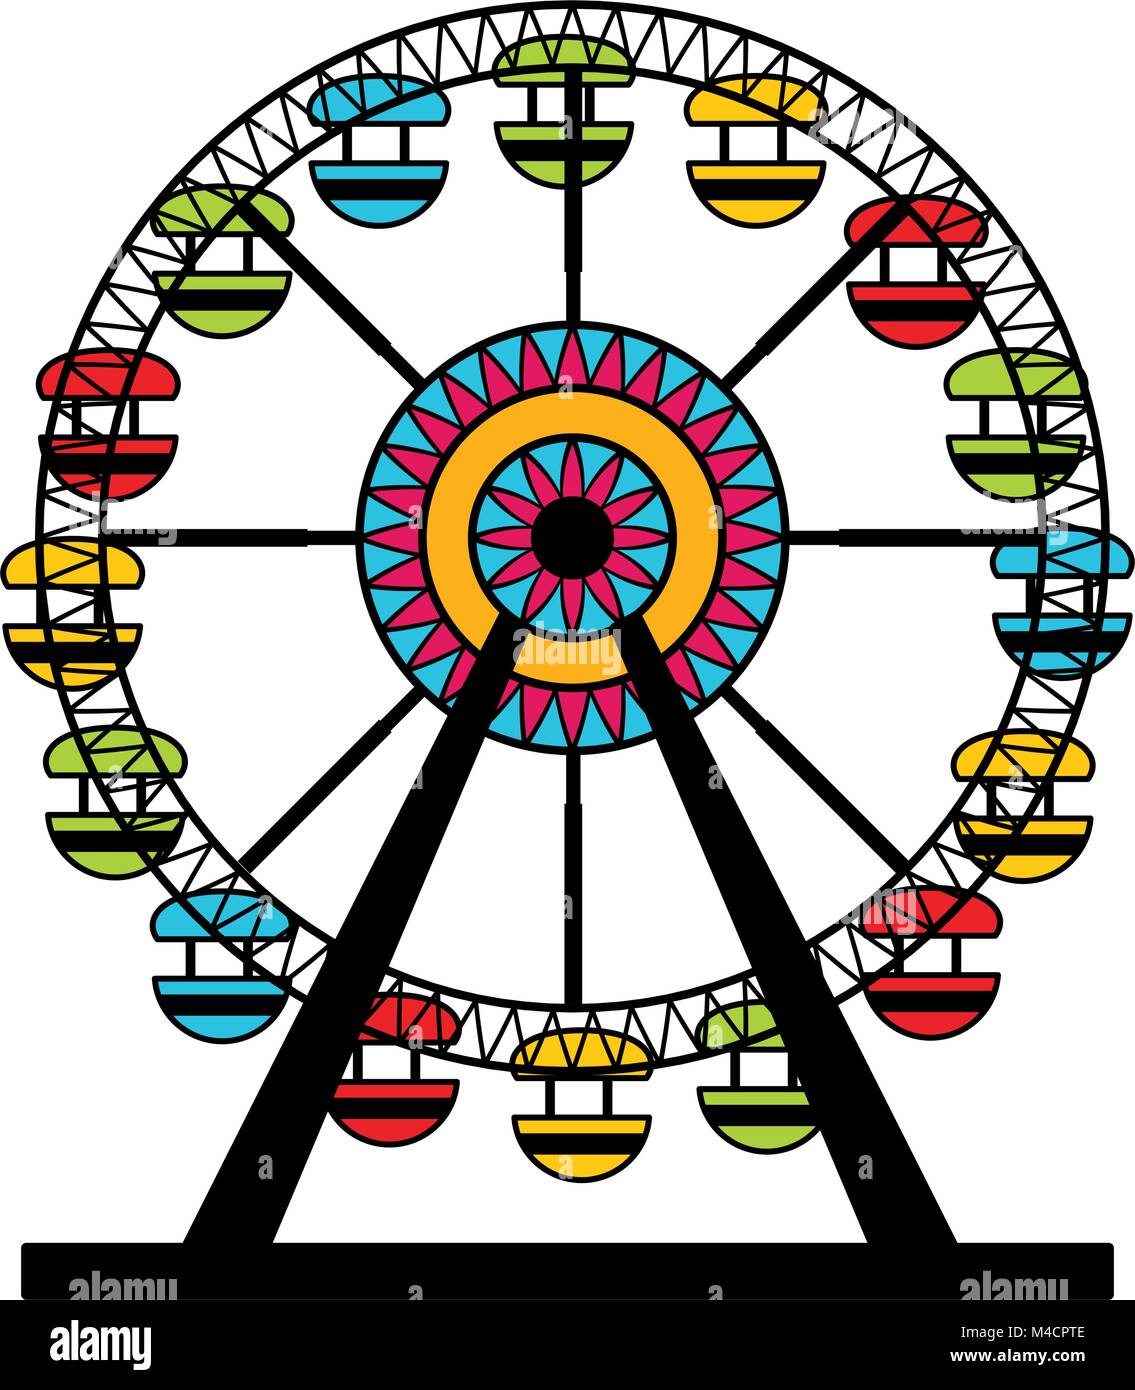 An image of a colorful ferris wheel amusement park ride. Stock Vector